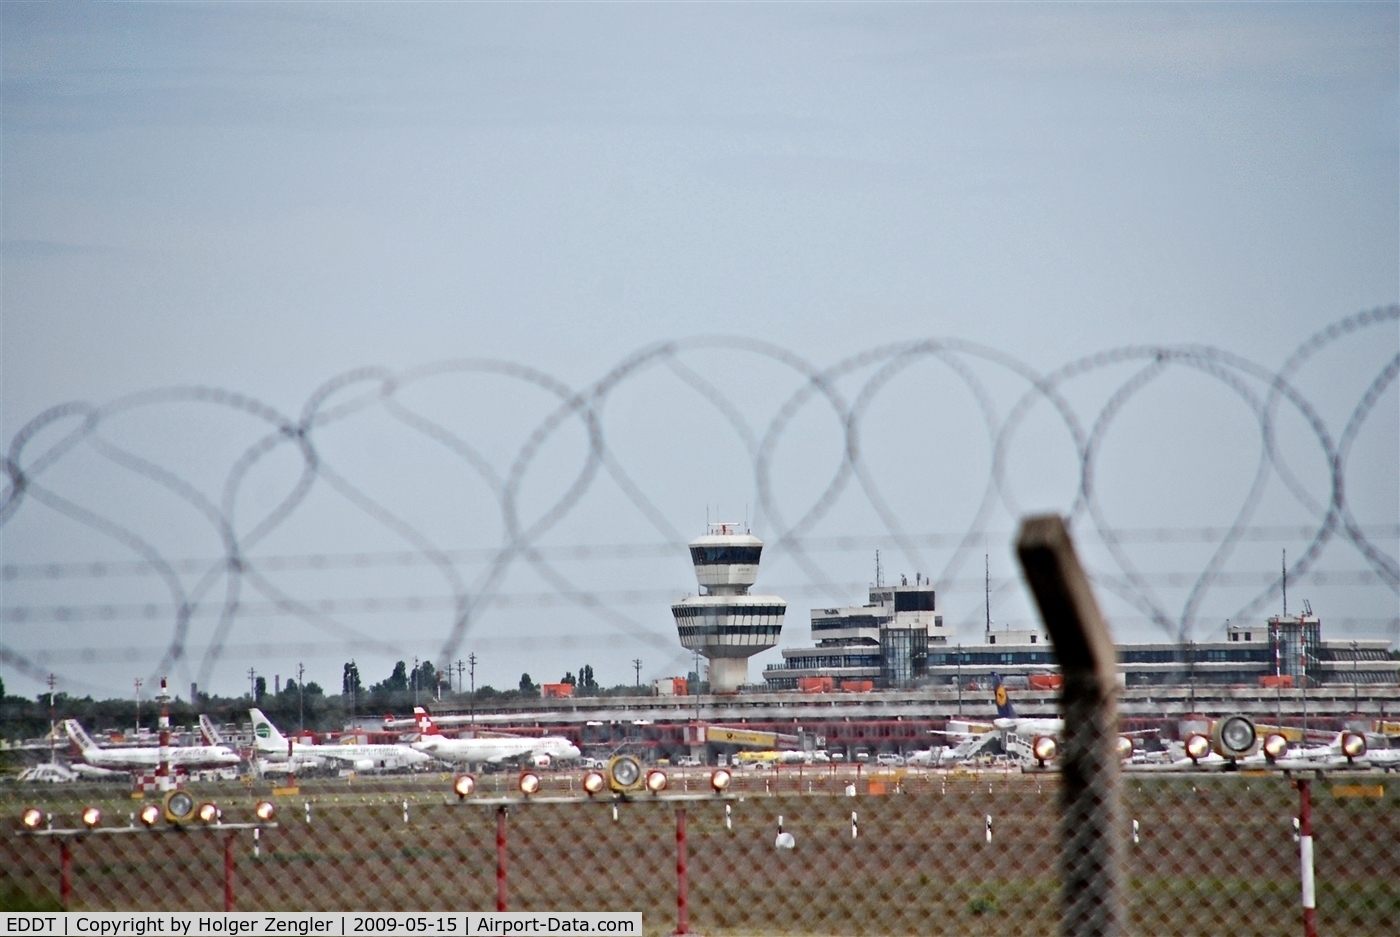 Tegel International Airport (closing in 2011), Berlin Germany (EDDT) - View thru the fence to apron....